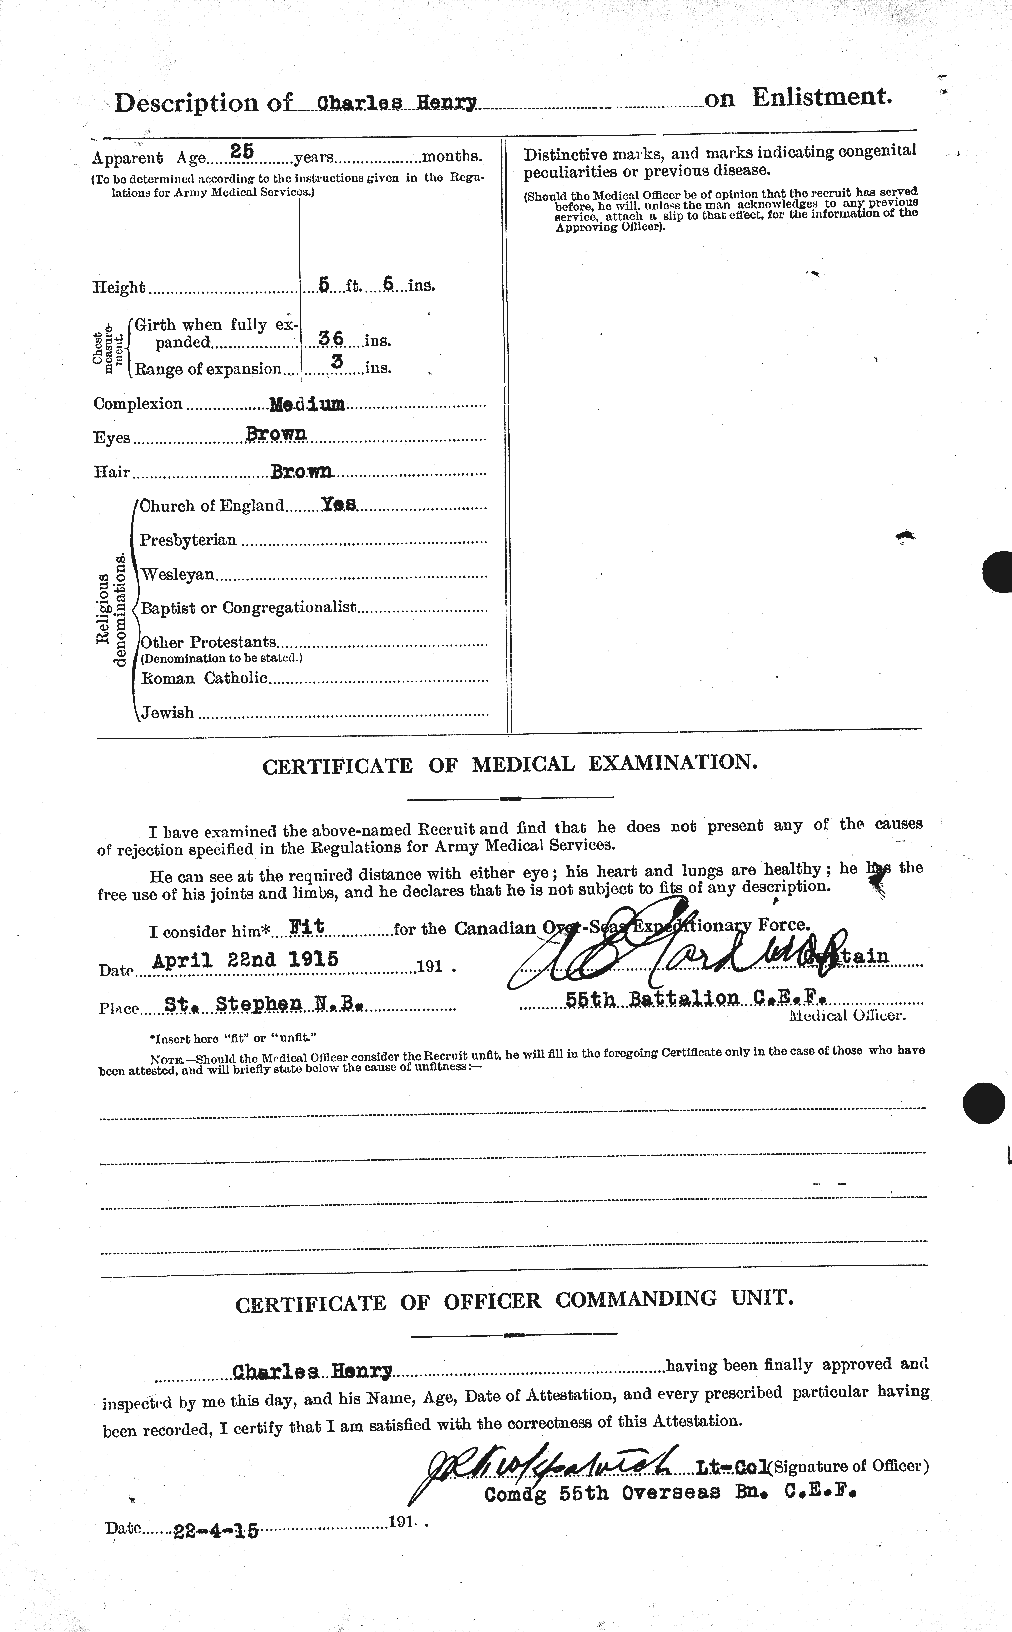 Personnel Records of the First World War - CEF 392799b